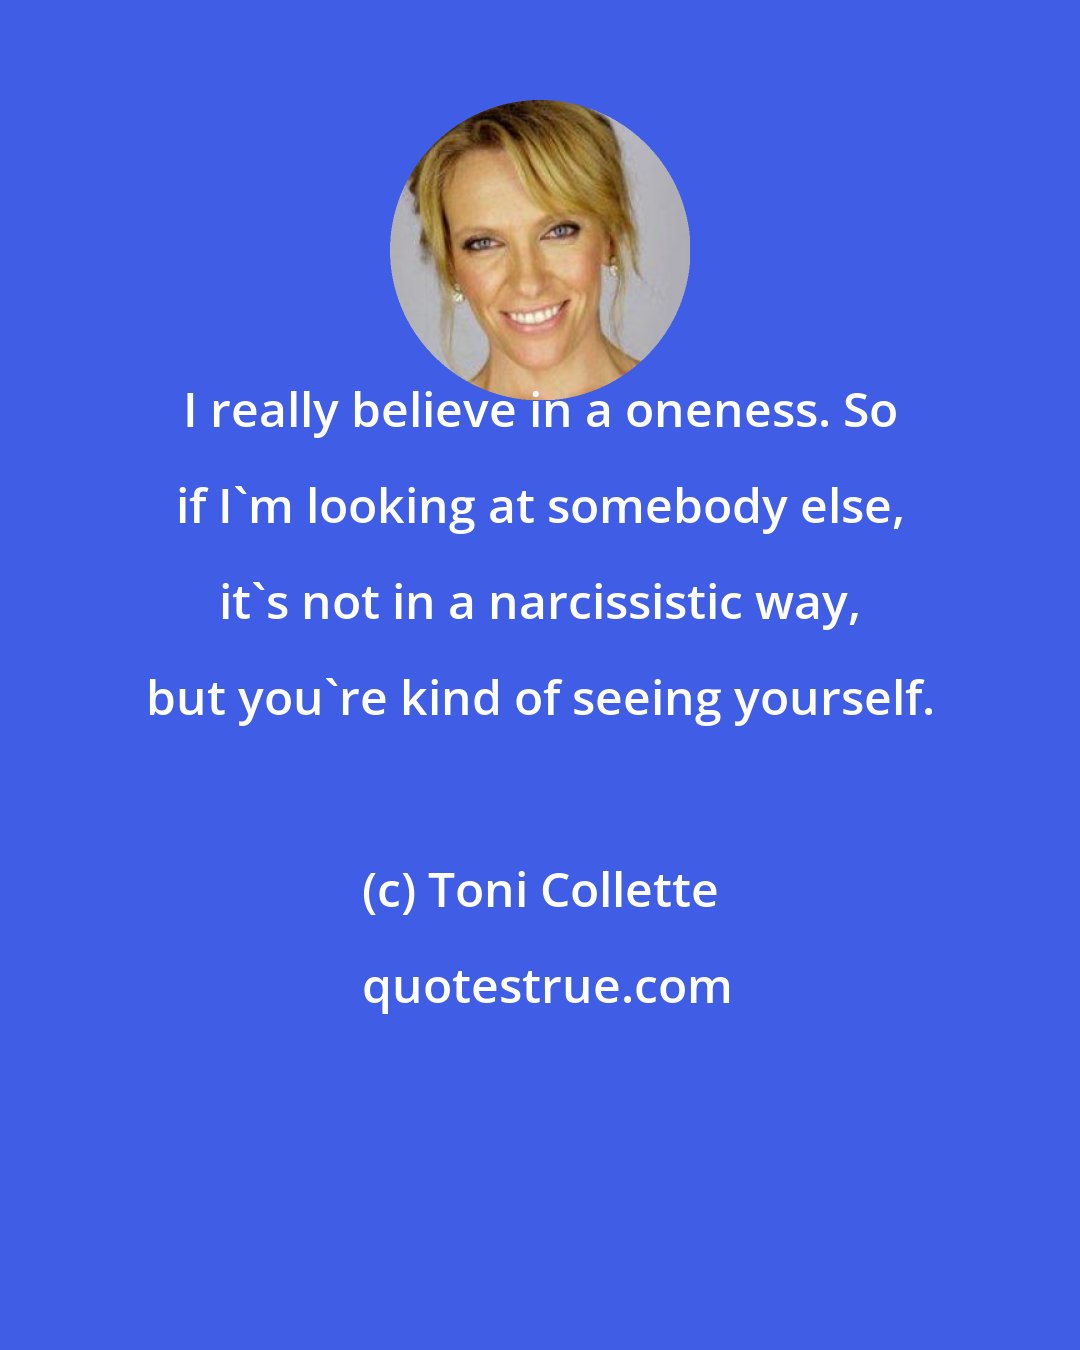 Toni Collette: I really believe in a oneness. So if I'm looking at somebody else, it's not in a narcissistic way, but you're kind of seeing yourself.